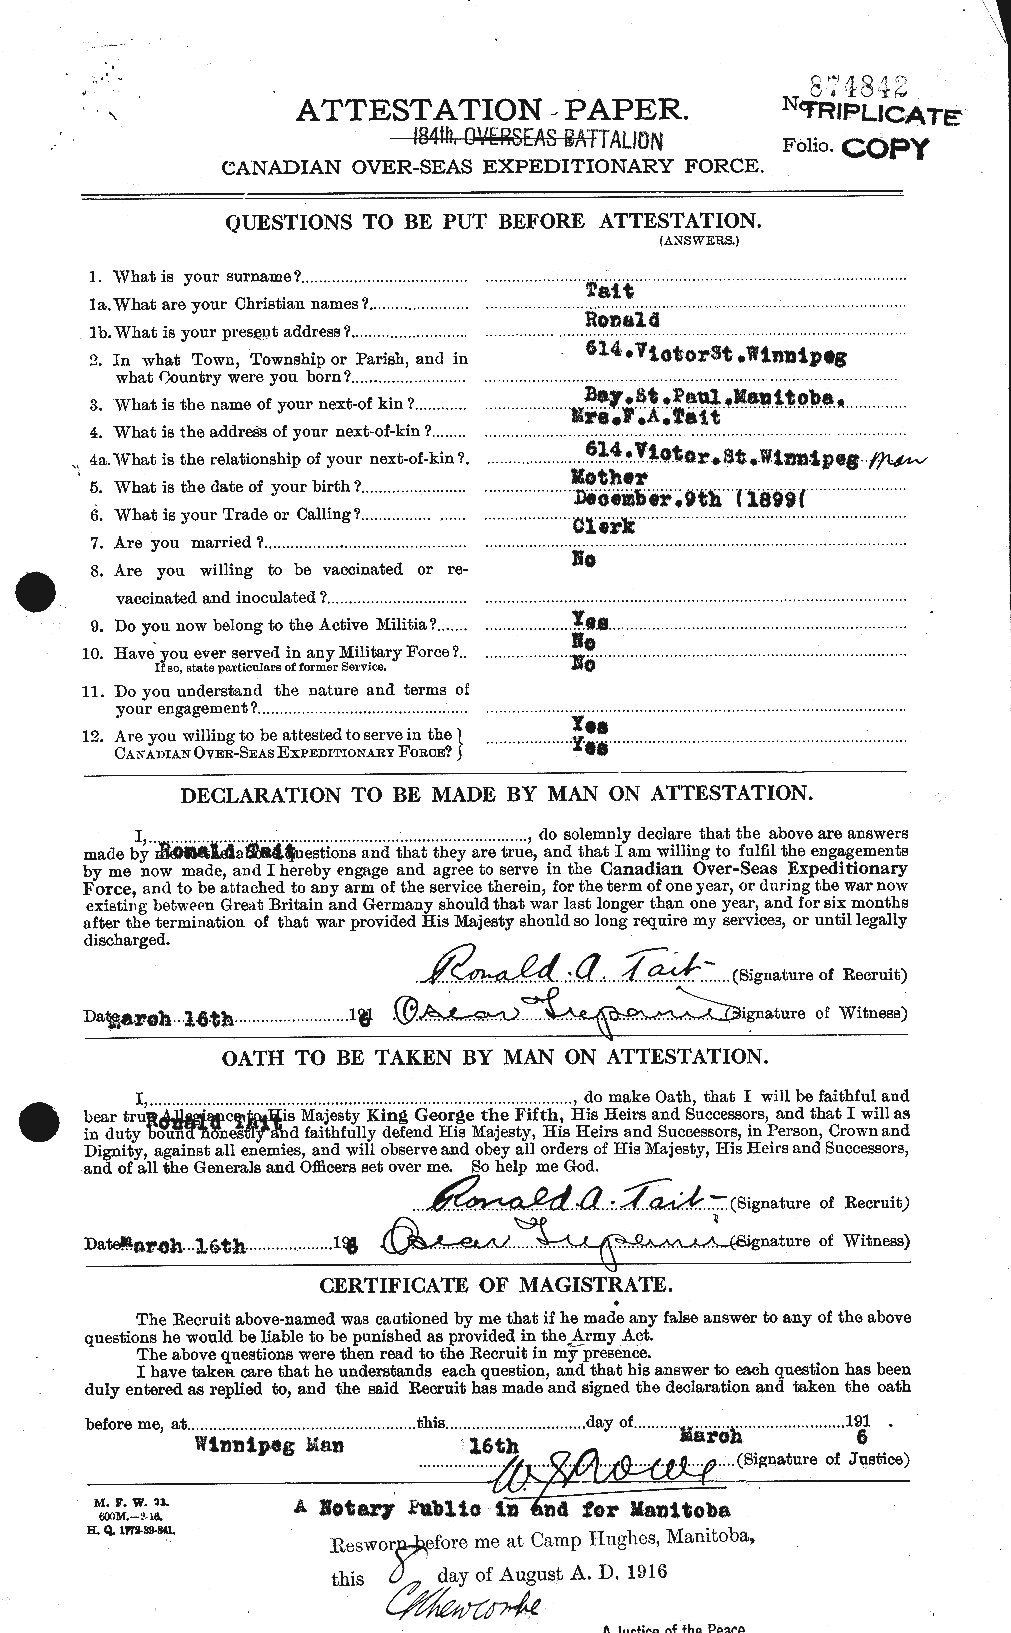 Personnel Records of the First World War - CEF 127000a